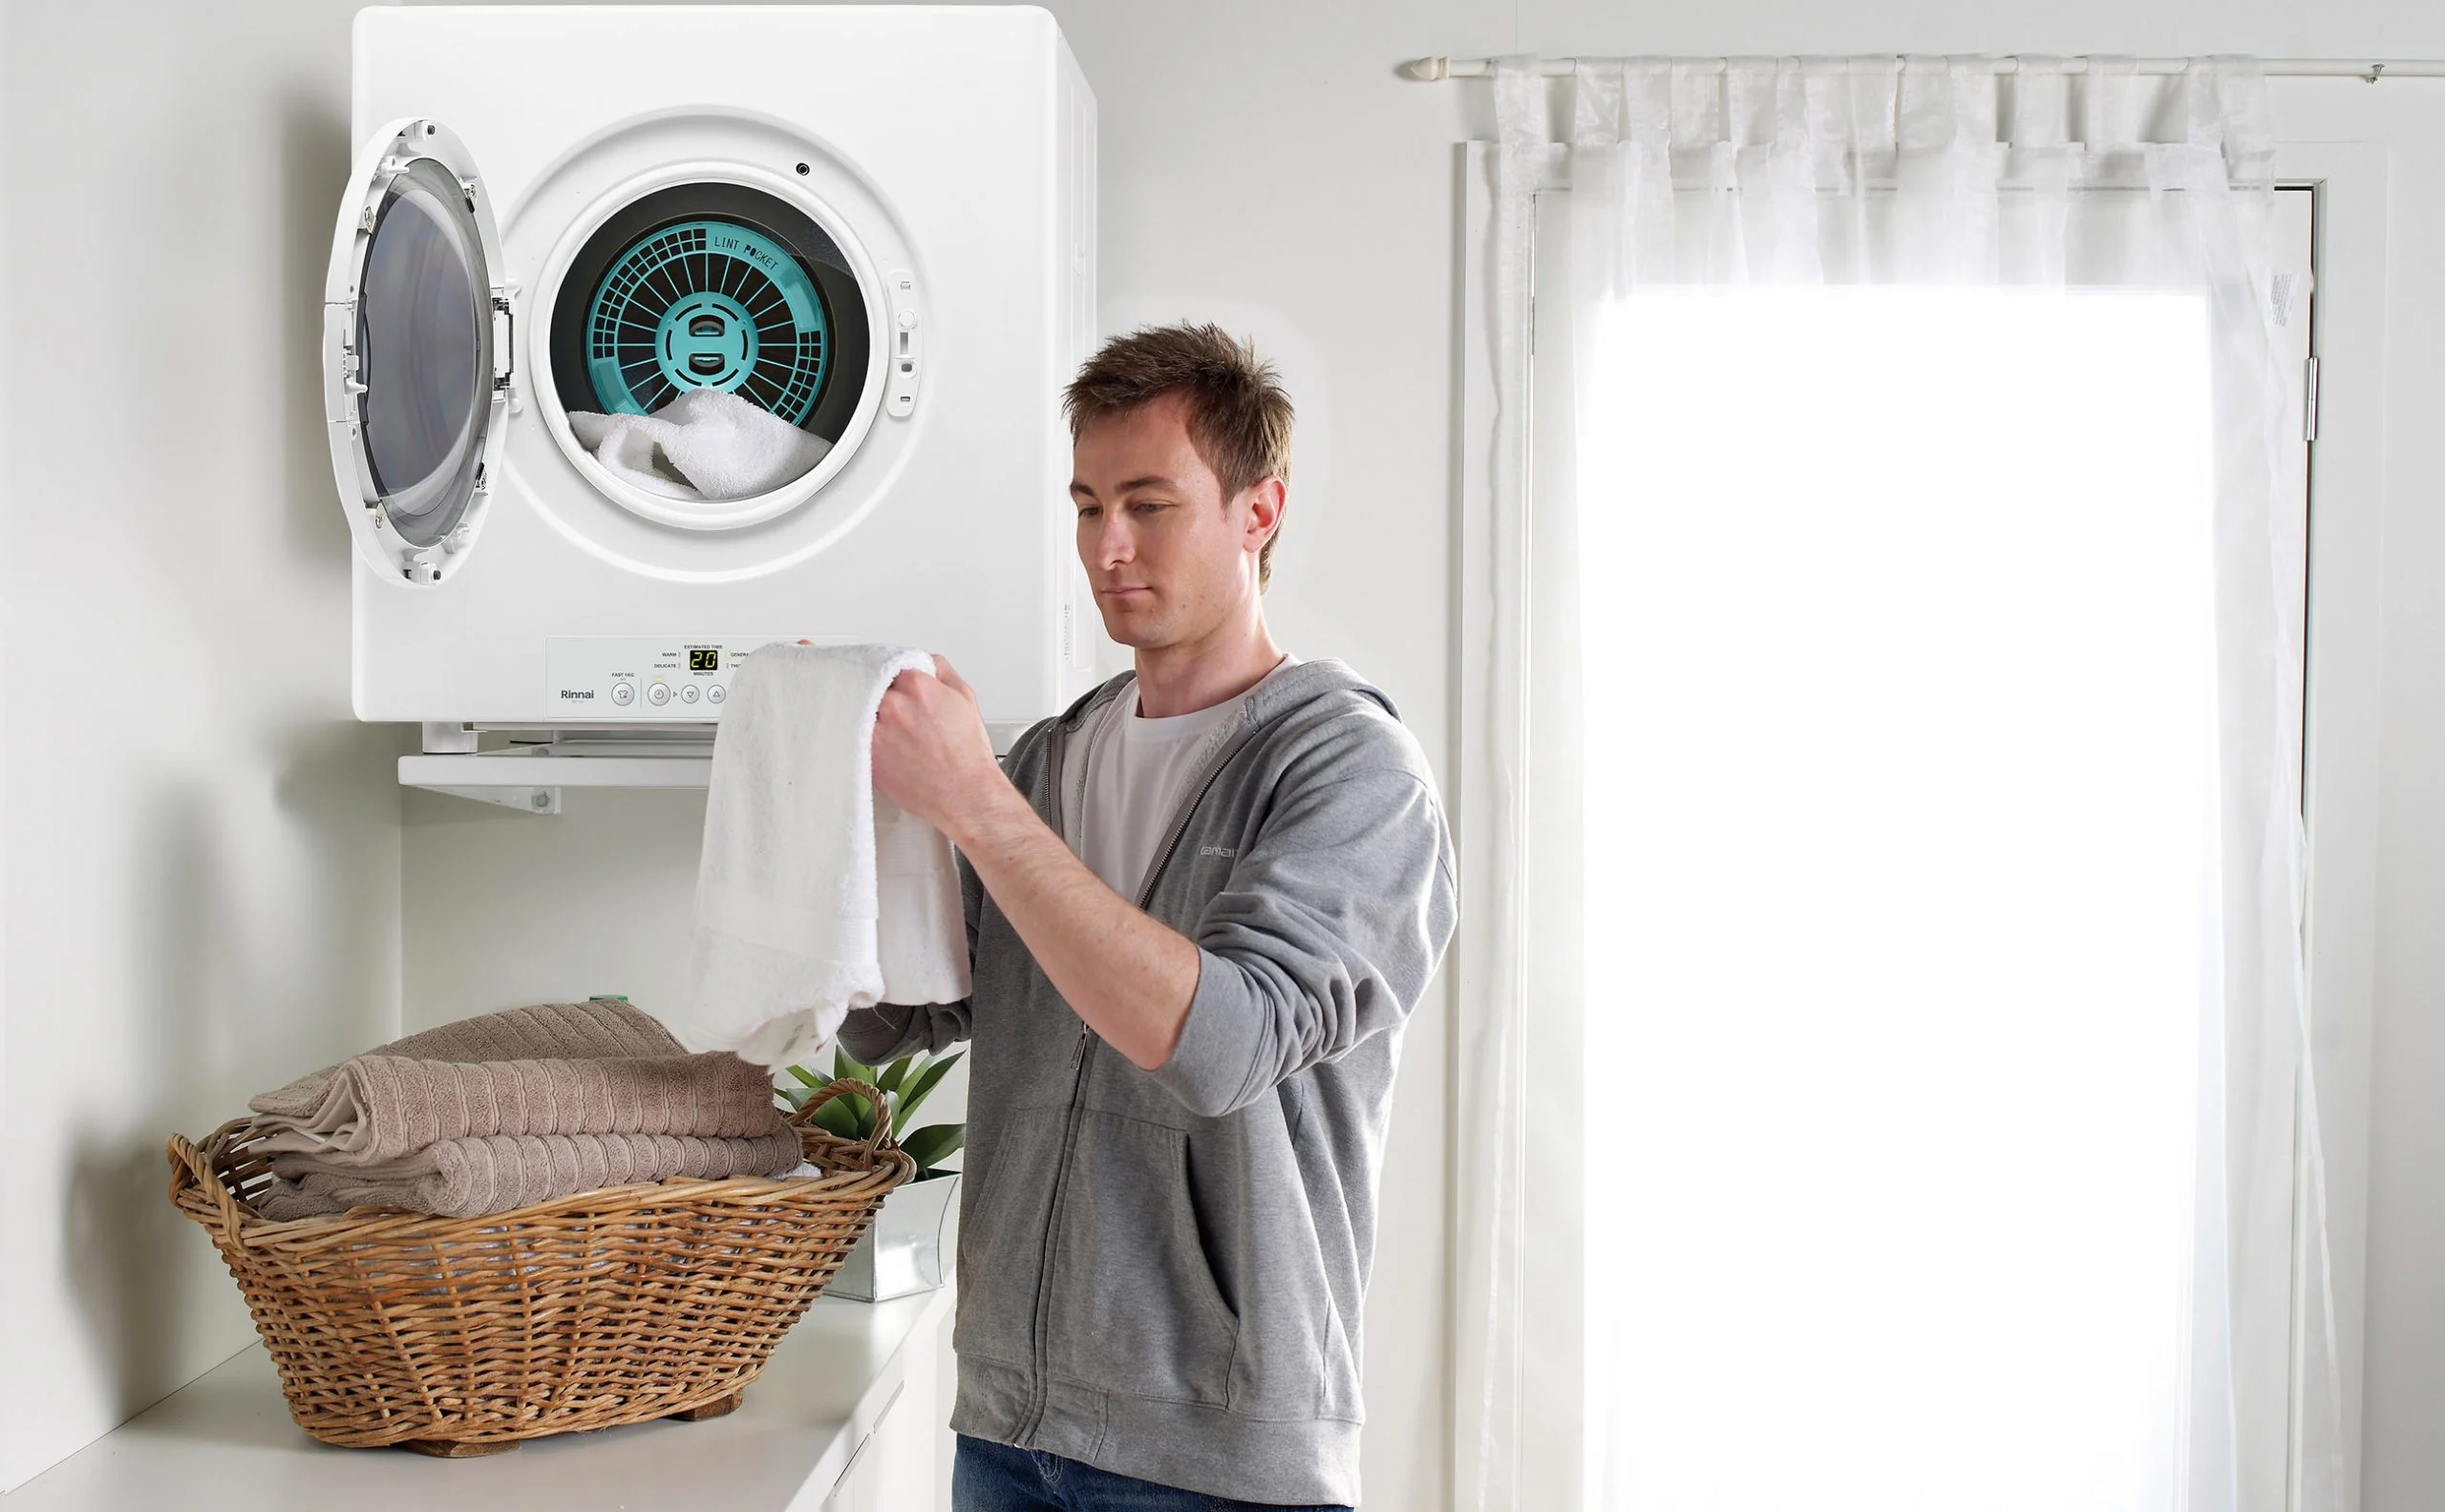 Rinnai-Dry-Soft�-Gas-Dryer-New-Version-Door-Open-Wide-View-with-Man-scaled